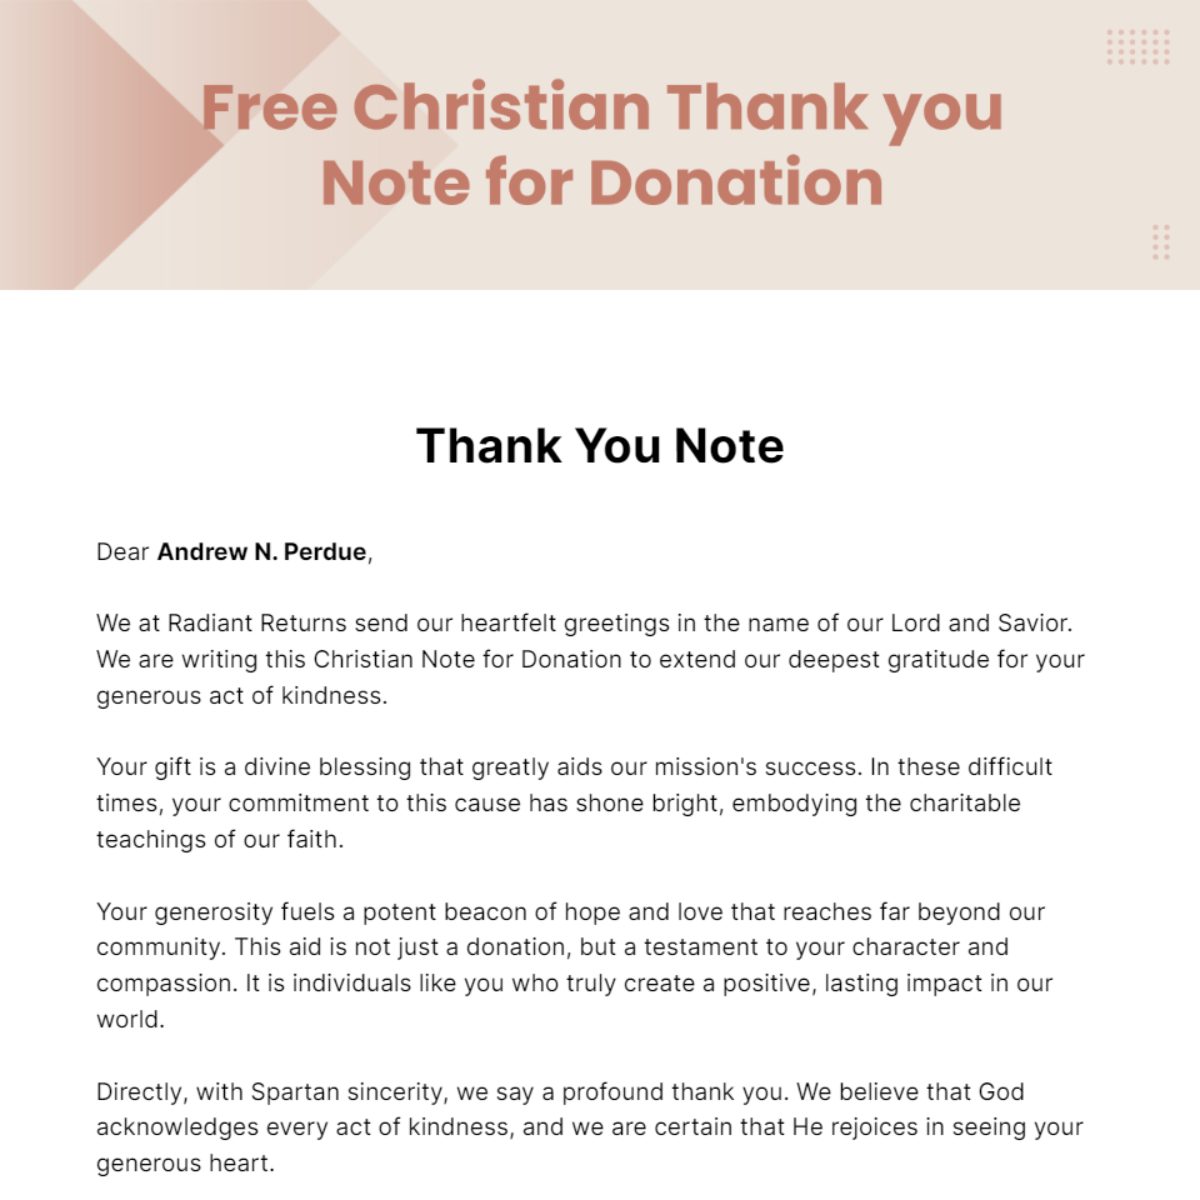 Christian Thank you Note for Donation Template